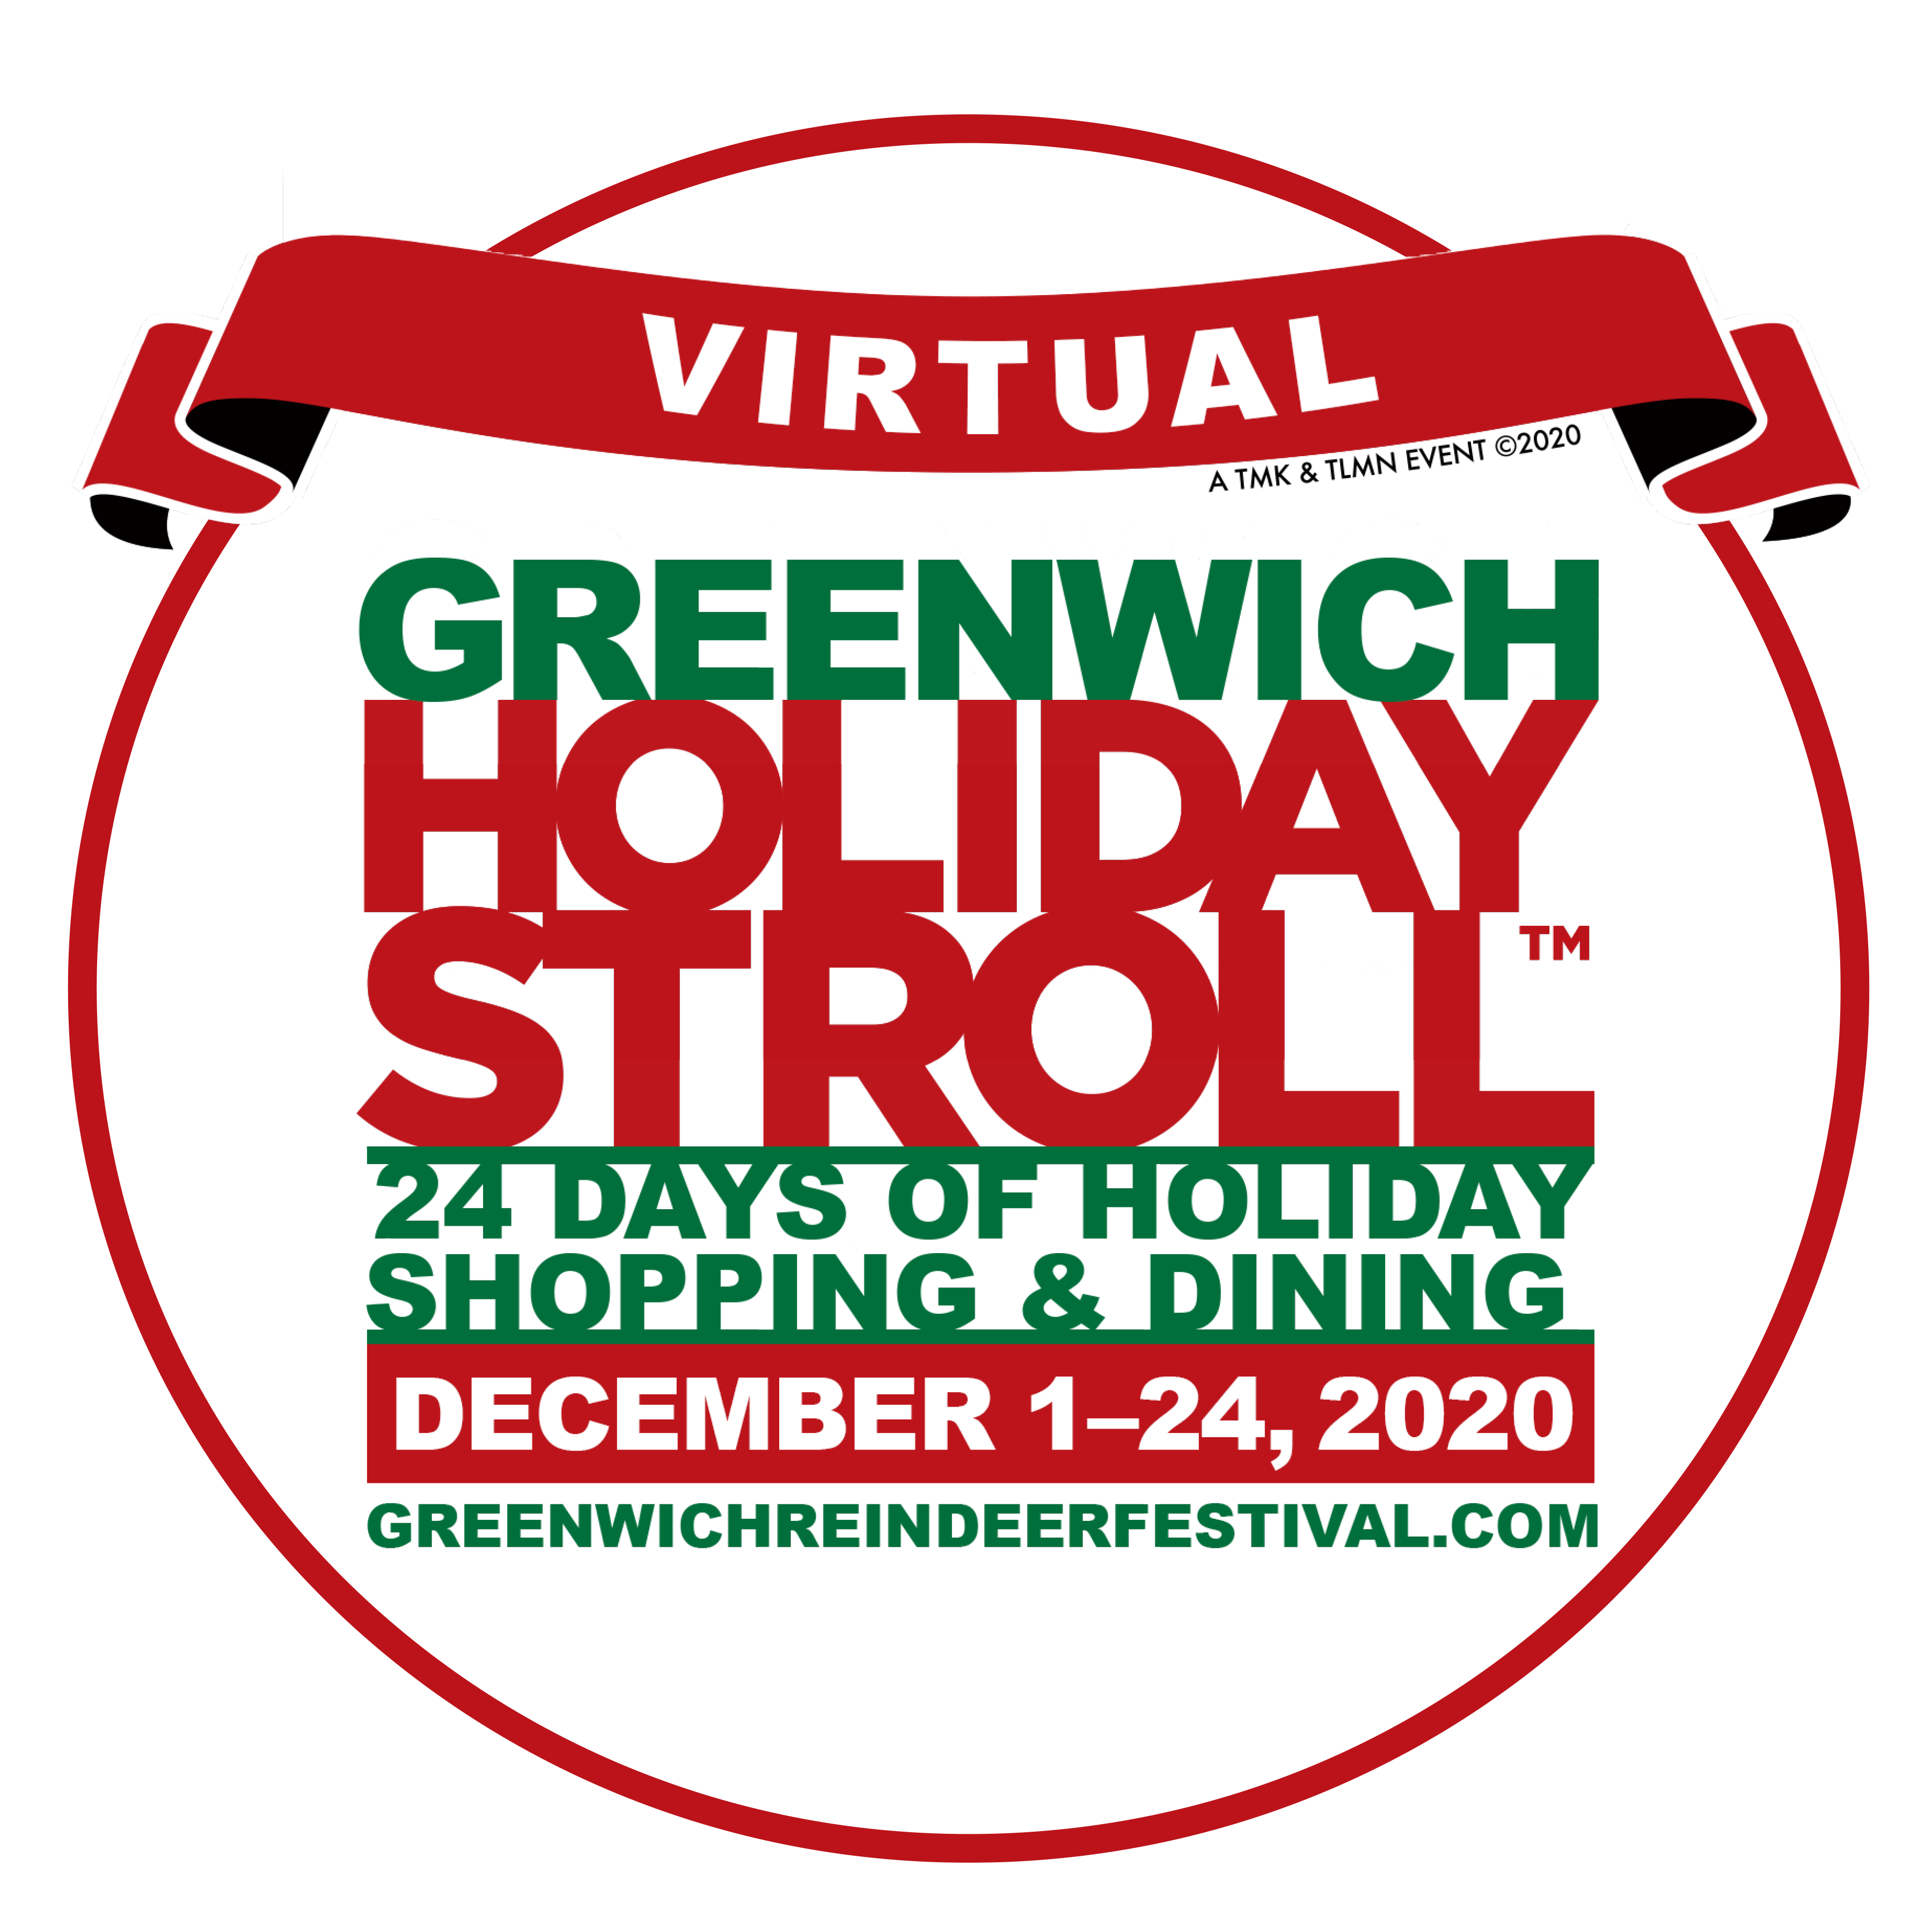 Virtual Greenwich Holiday Stroll, 24 Days of Holiday Shopping & Dining